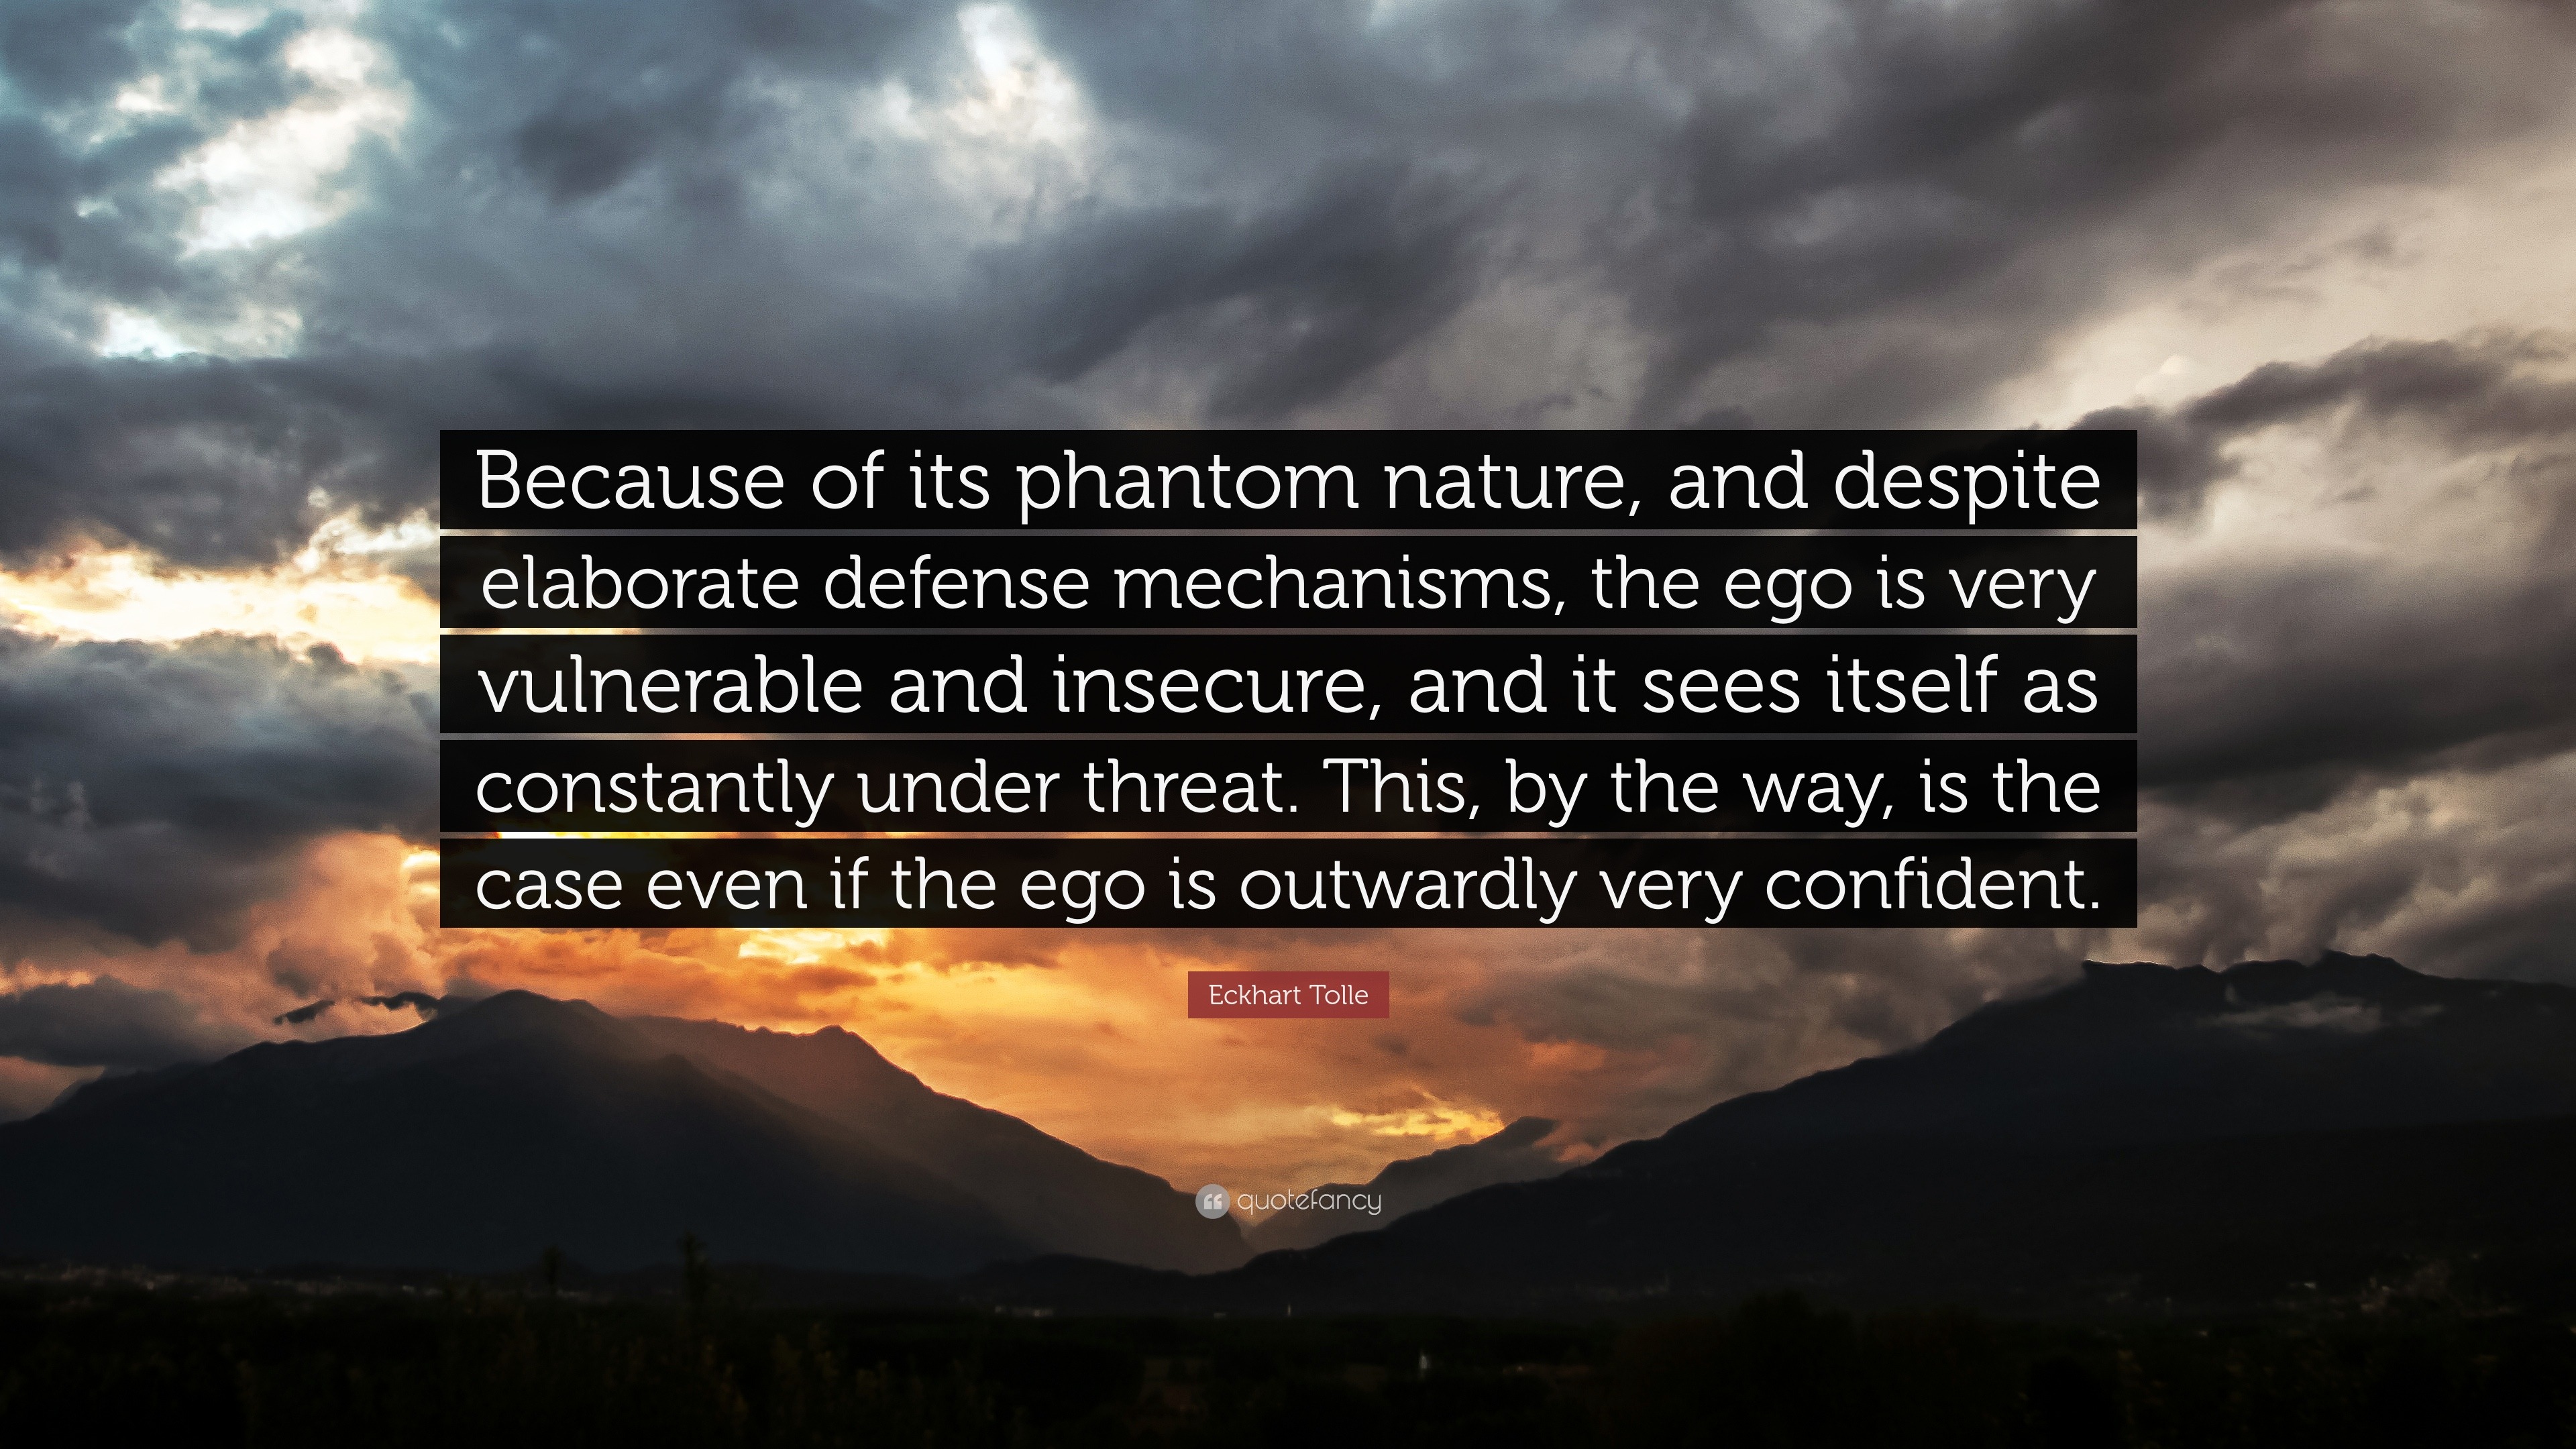 Aktiver område kost Eckhart Tolle Quote: “Because of its phantom nature, and despite elaborate  defense mechanisms, the ego is very vulnerable and insecure, and it...”